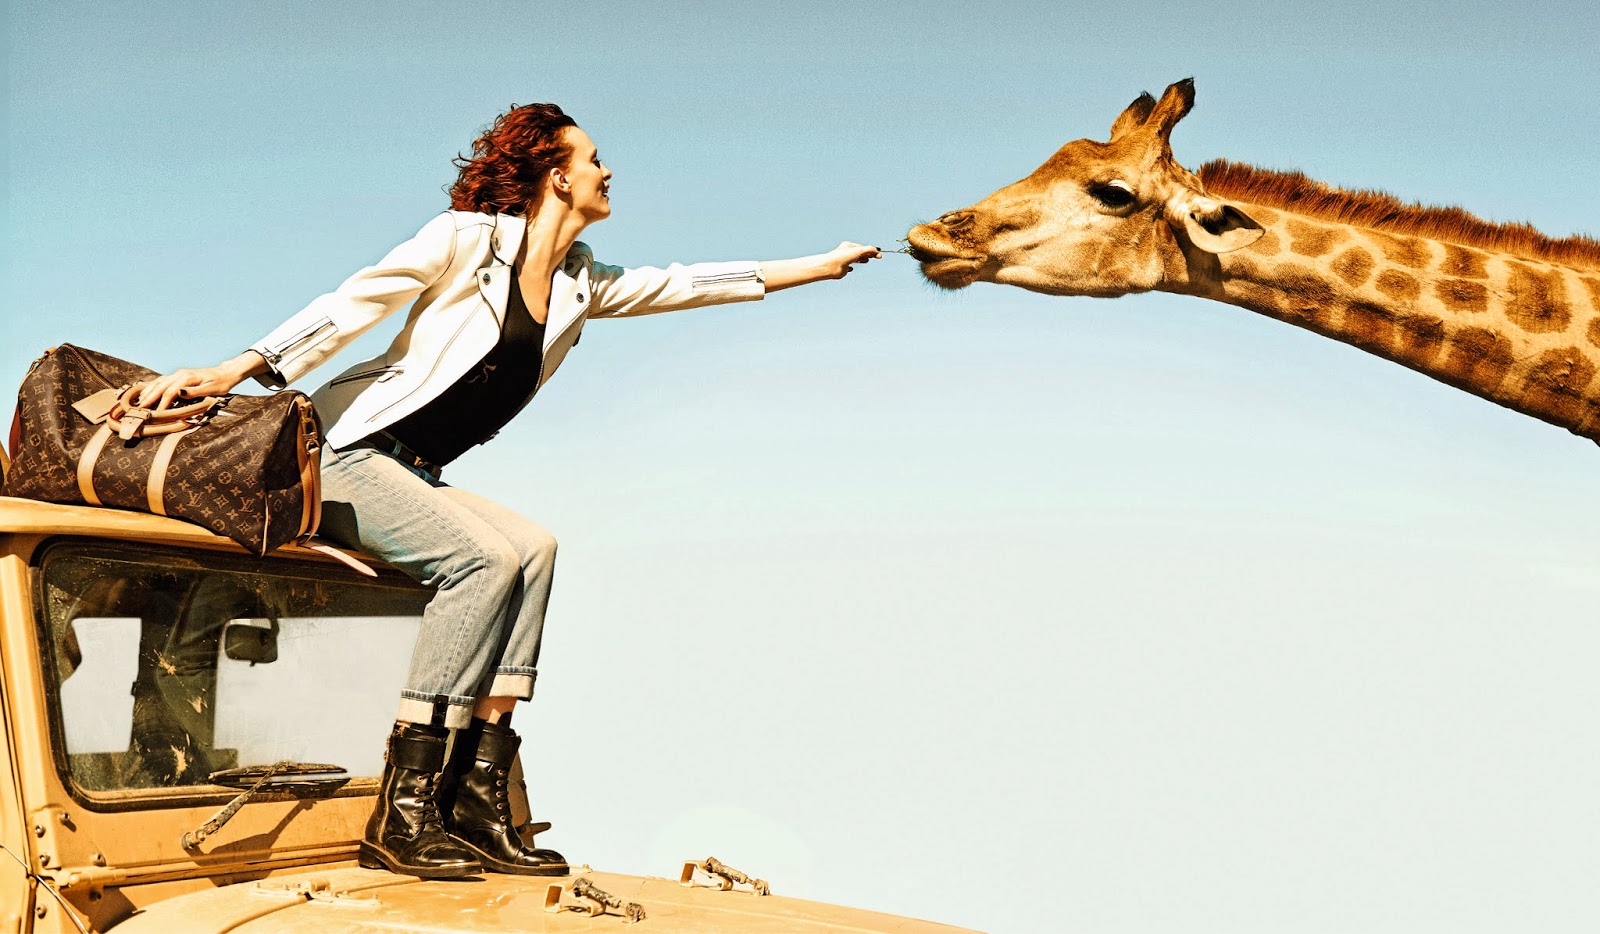 GO TO WORK - LOUIS VUITTON AFRICA TRAVEL AD CAMPAIGN